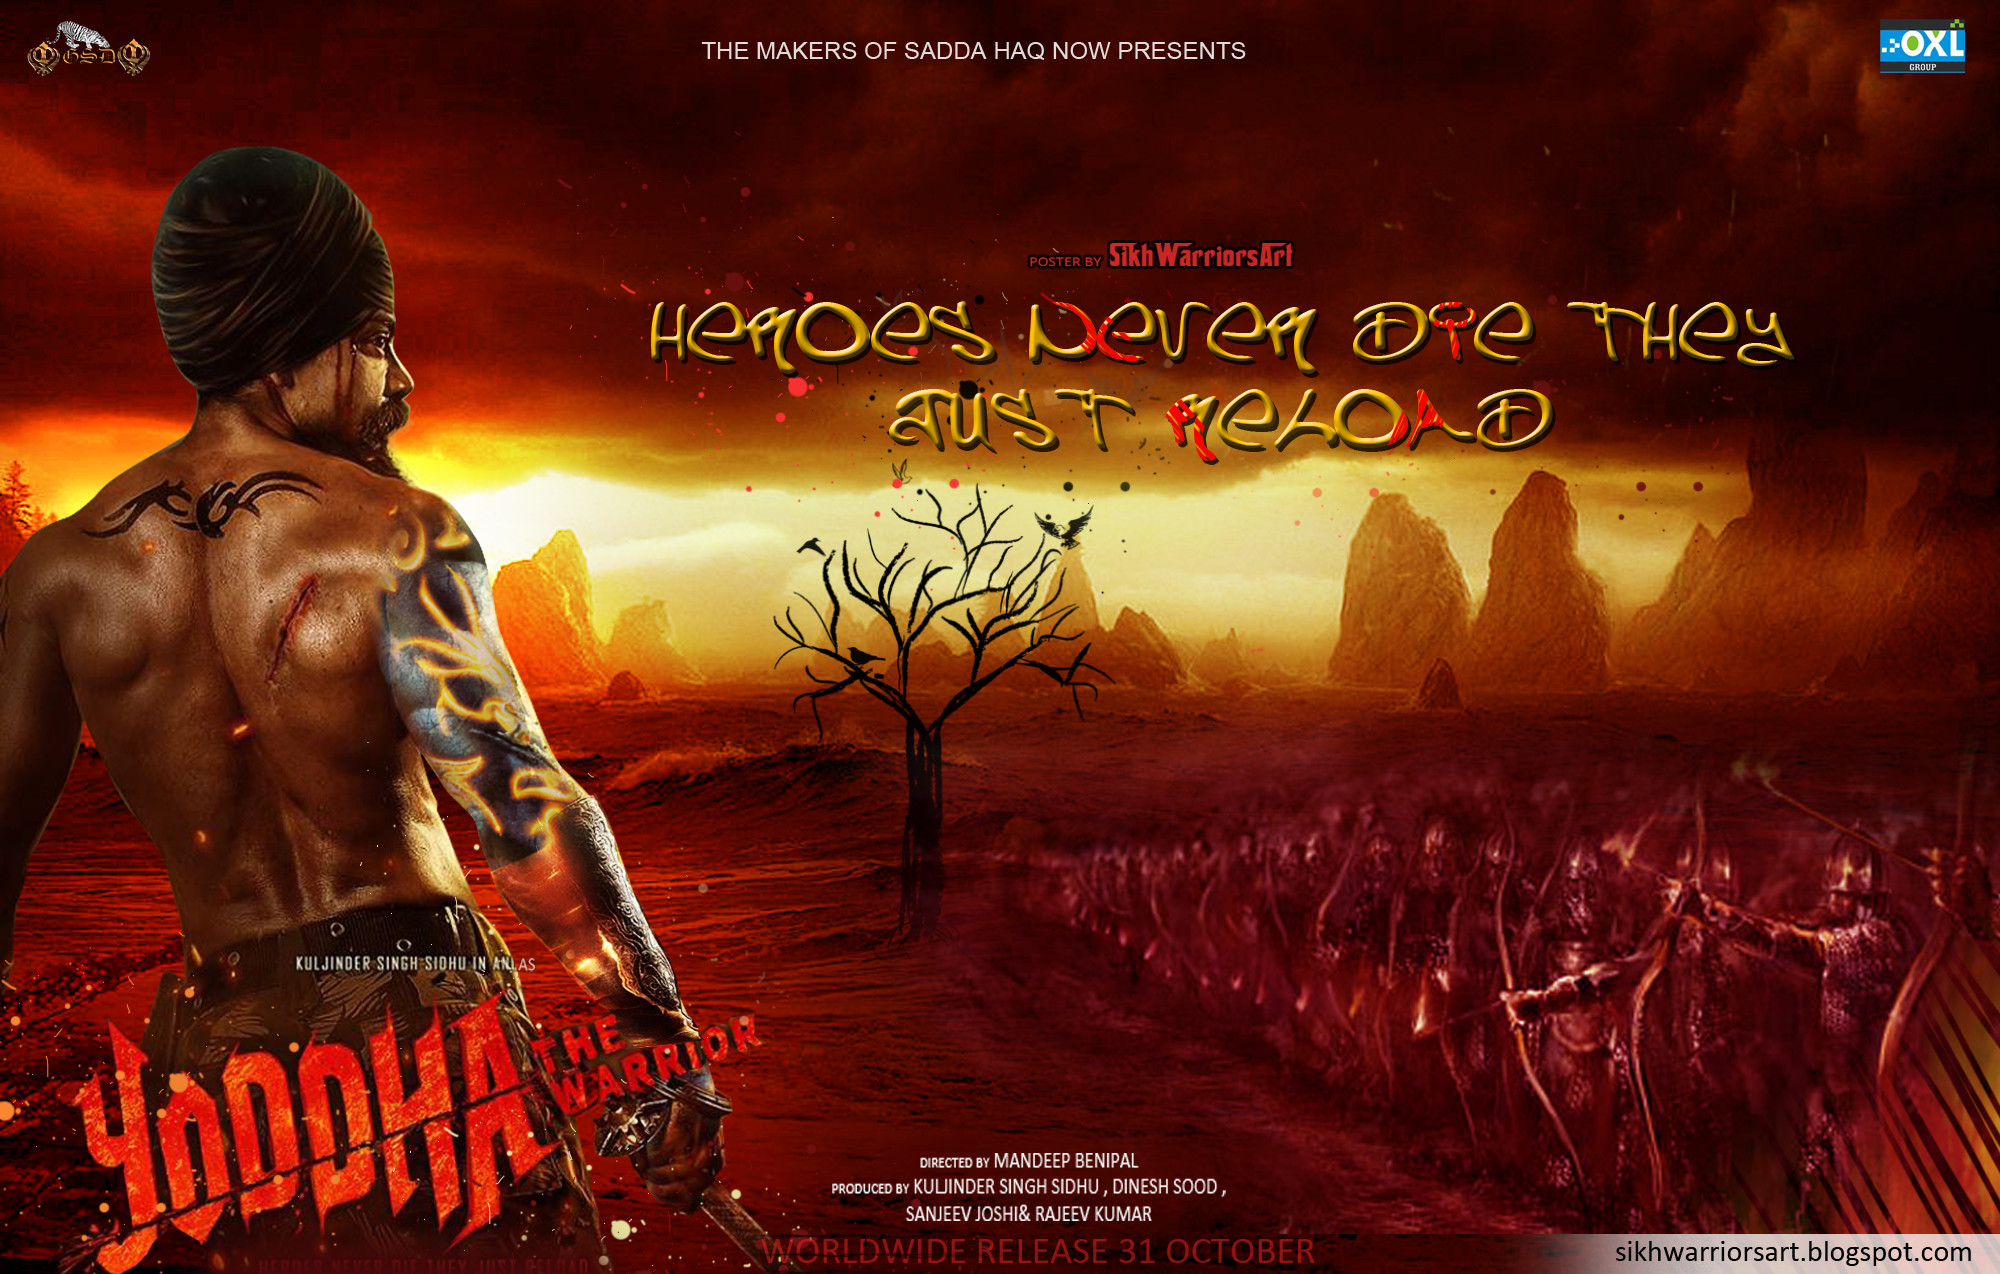 2000x1274 ... freehqwallpapers Yoddha The Warrior punjabi movie by freehqwallpapers